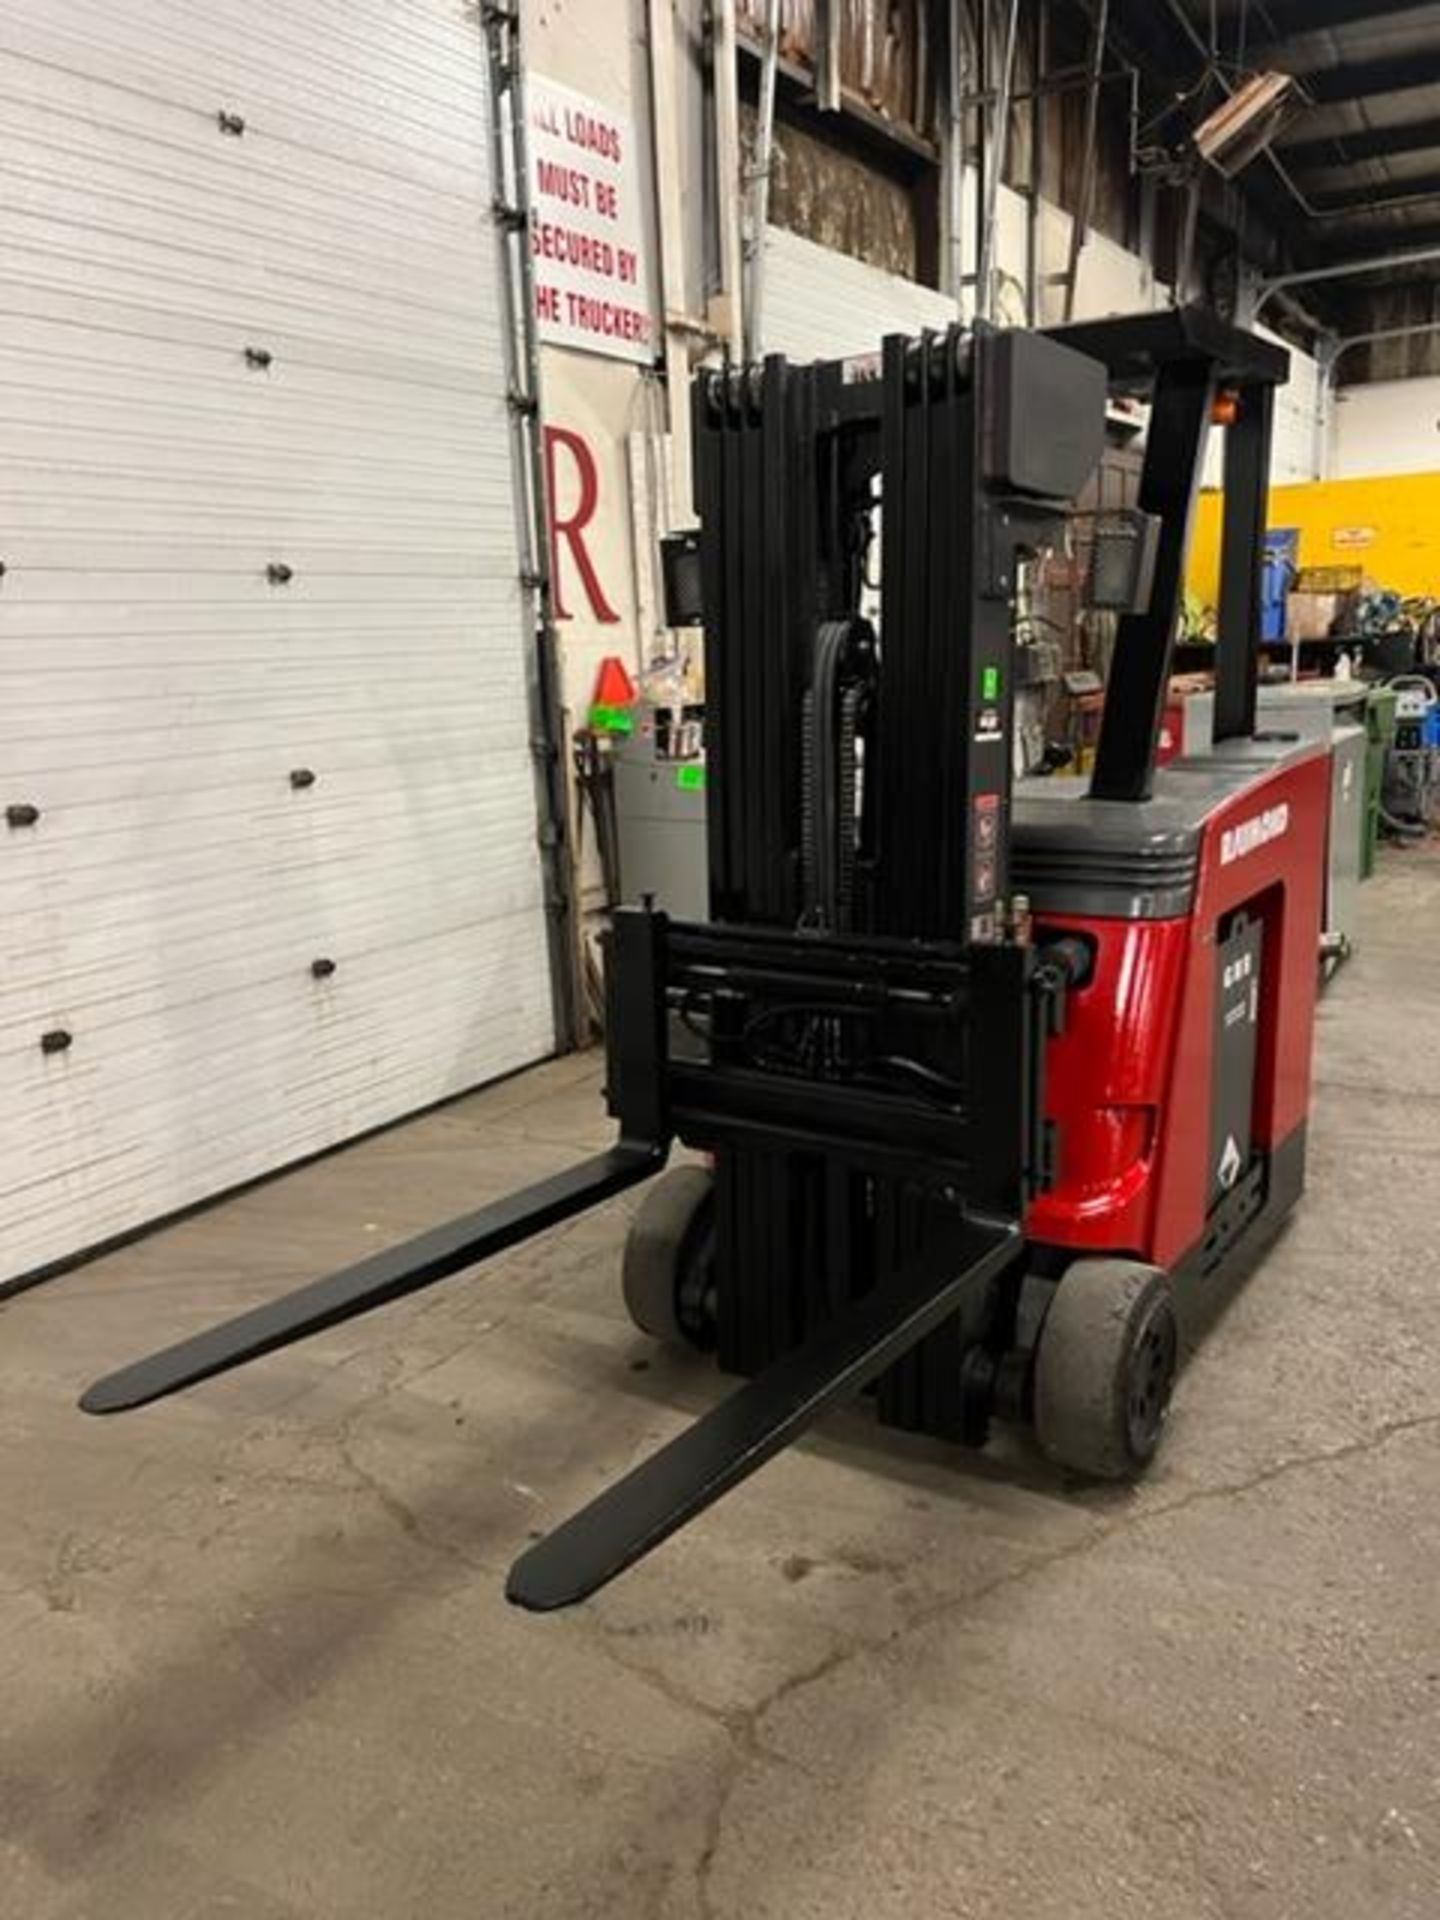 FREE CUSTOMS - NICE Raymond Stand Up Counterbalance Forklift Truck 4-STAGE MAST Pallet Lifter - Image 3 of 4